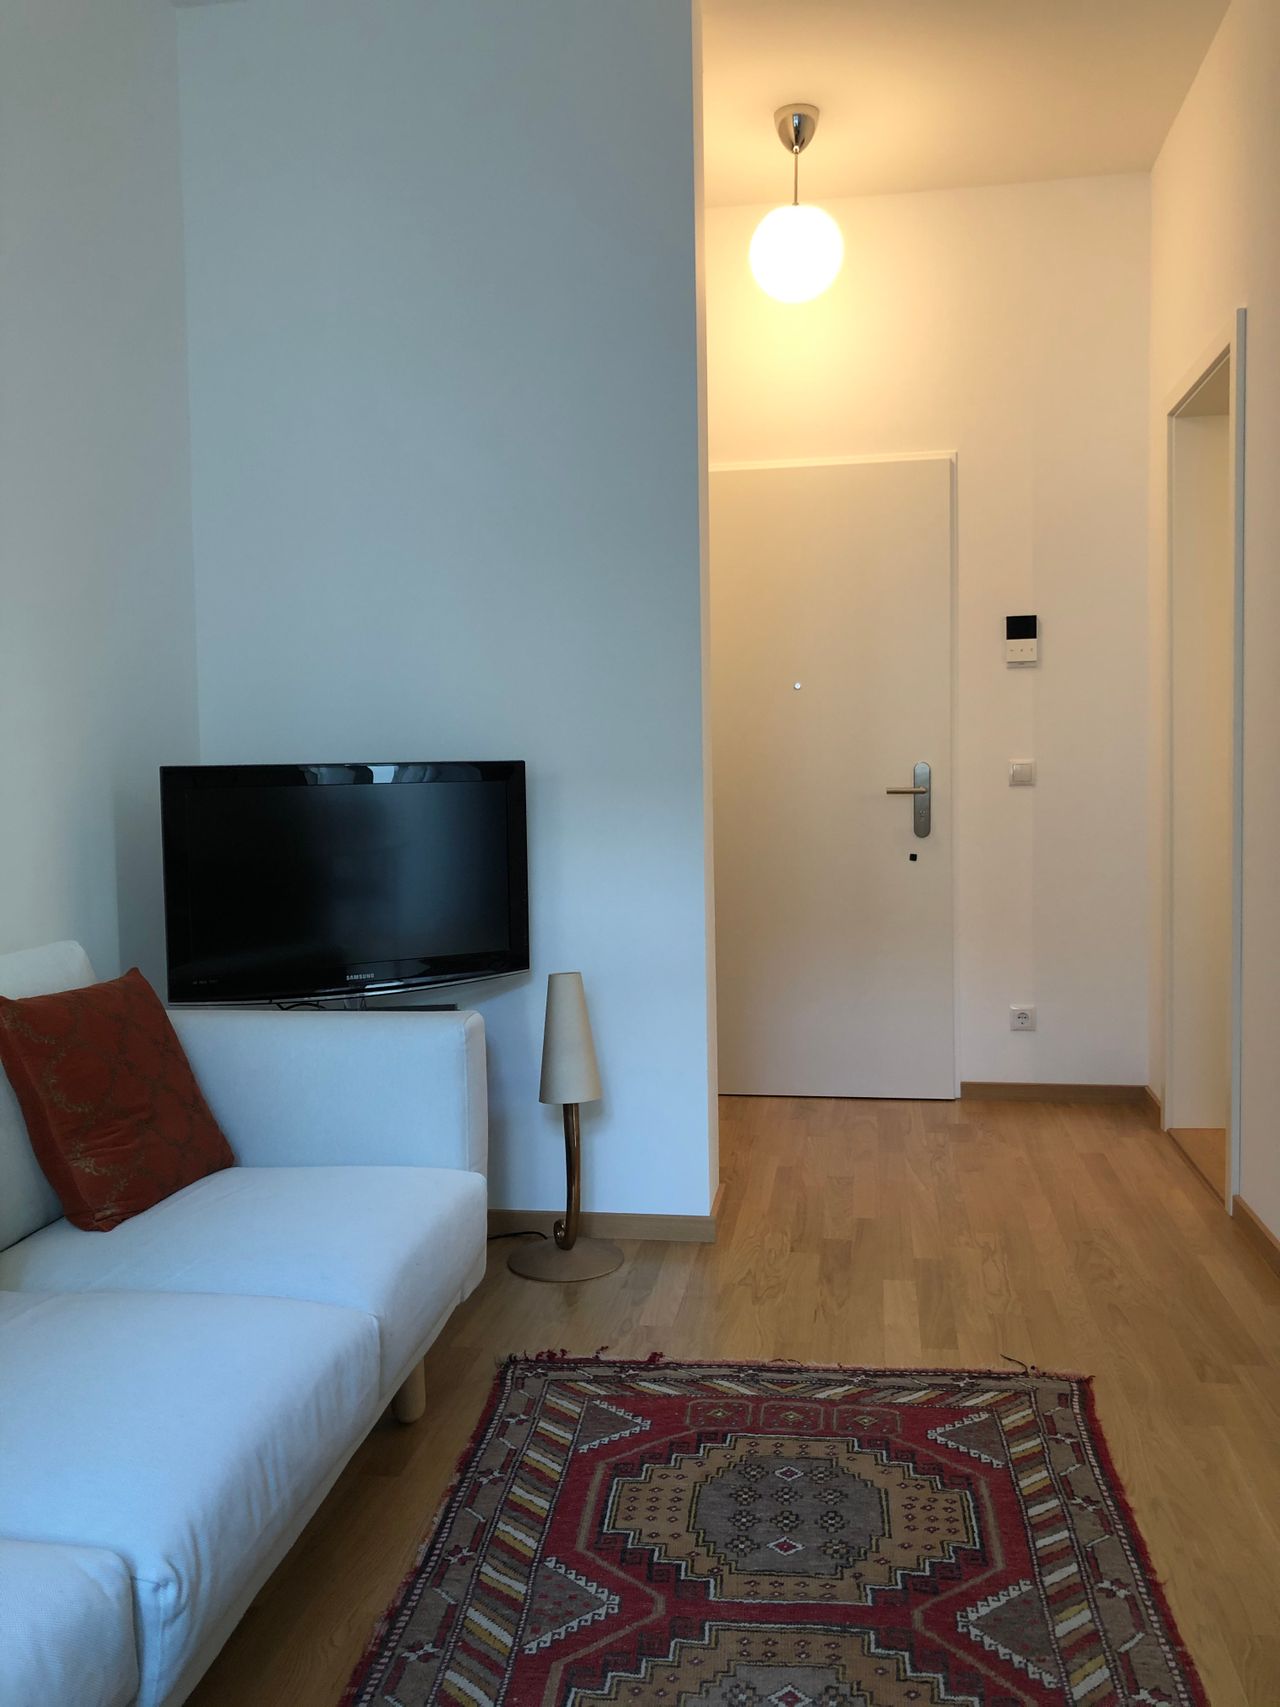 Modern, fully furnished business apartment in downtown Frankfurt